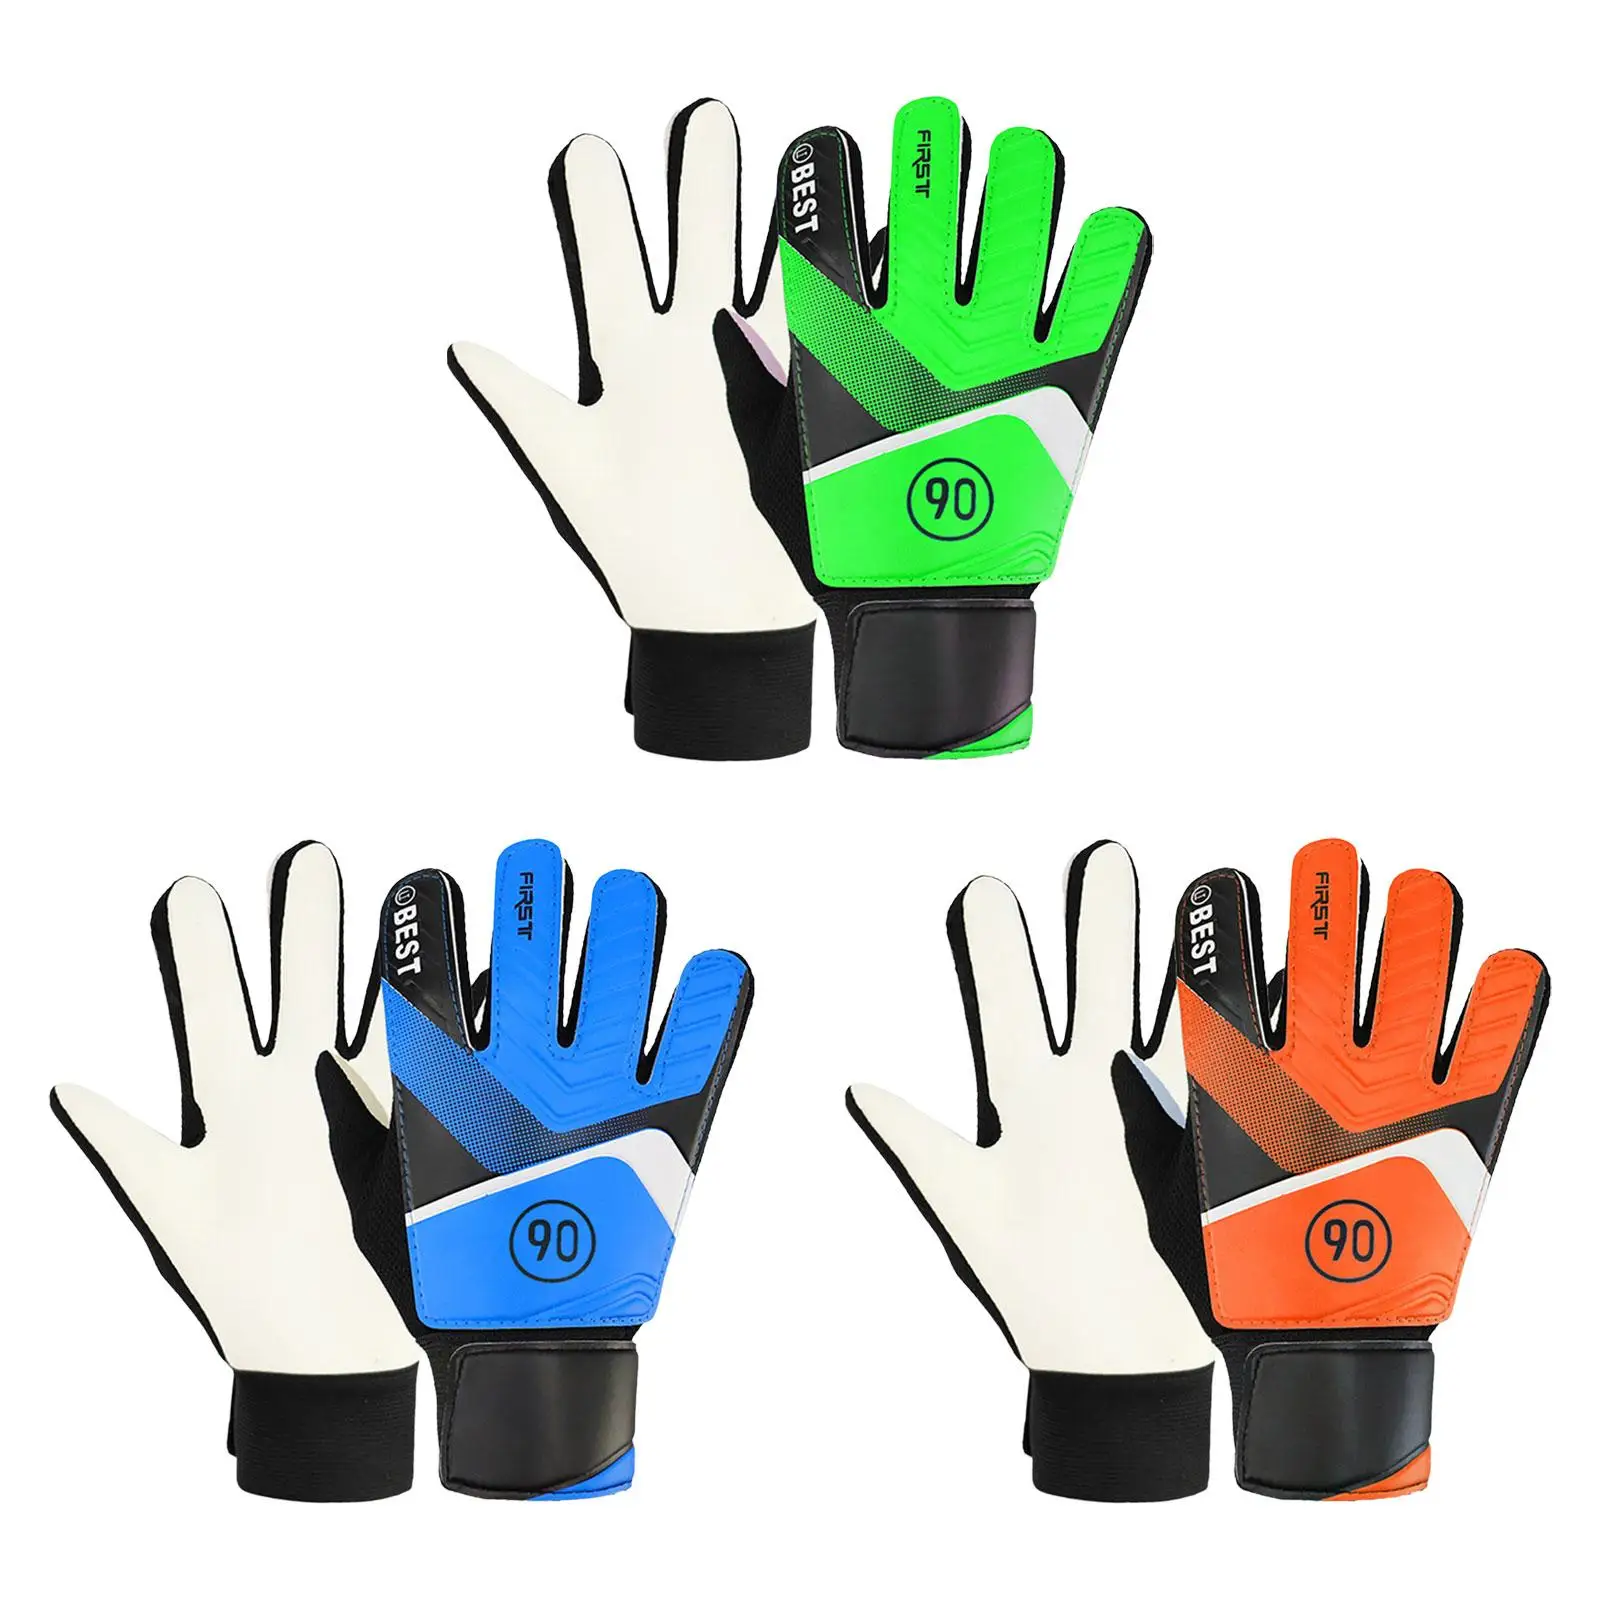 Soccer Goalkeeper Gloves Finger Protection Nonslip Training Match Strong Grip Comfortable Professional for Boys Girls Latex Palm